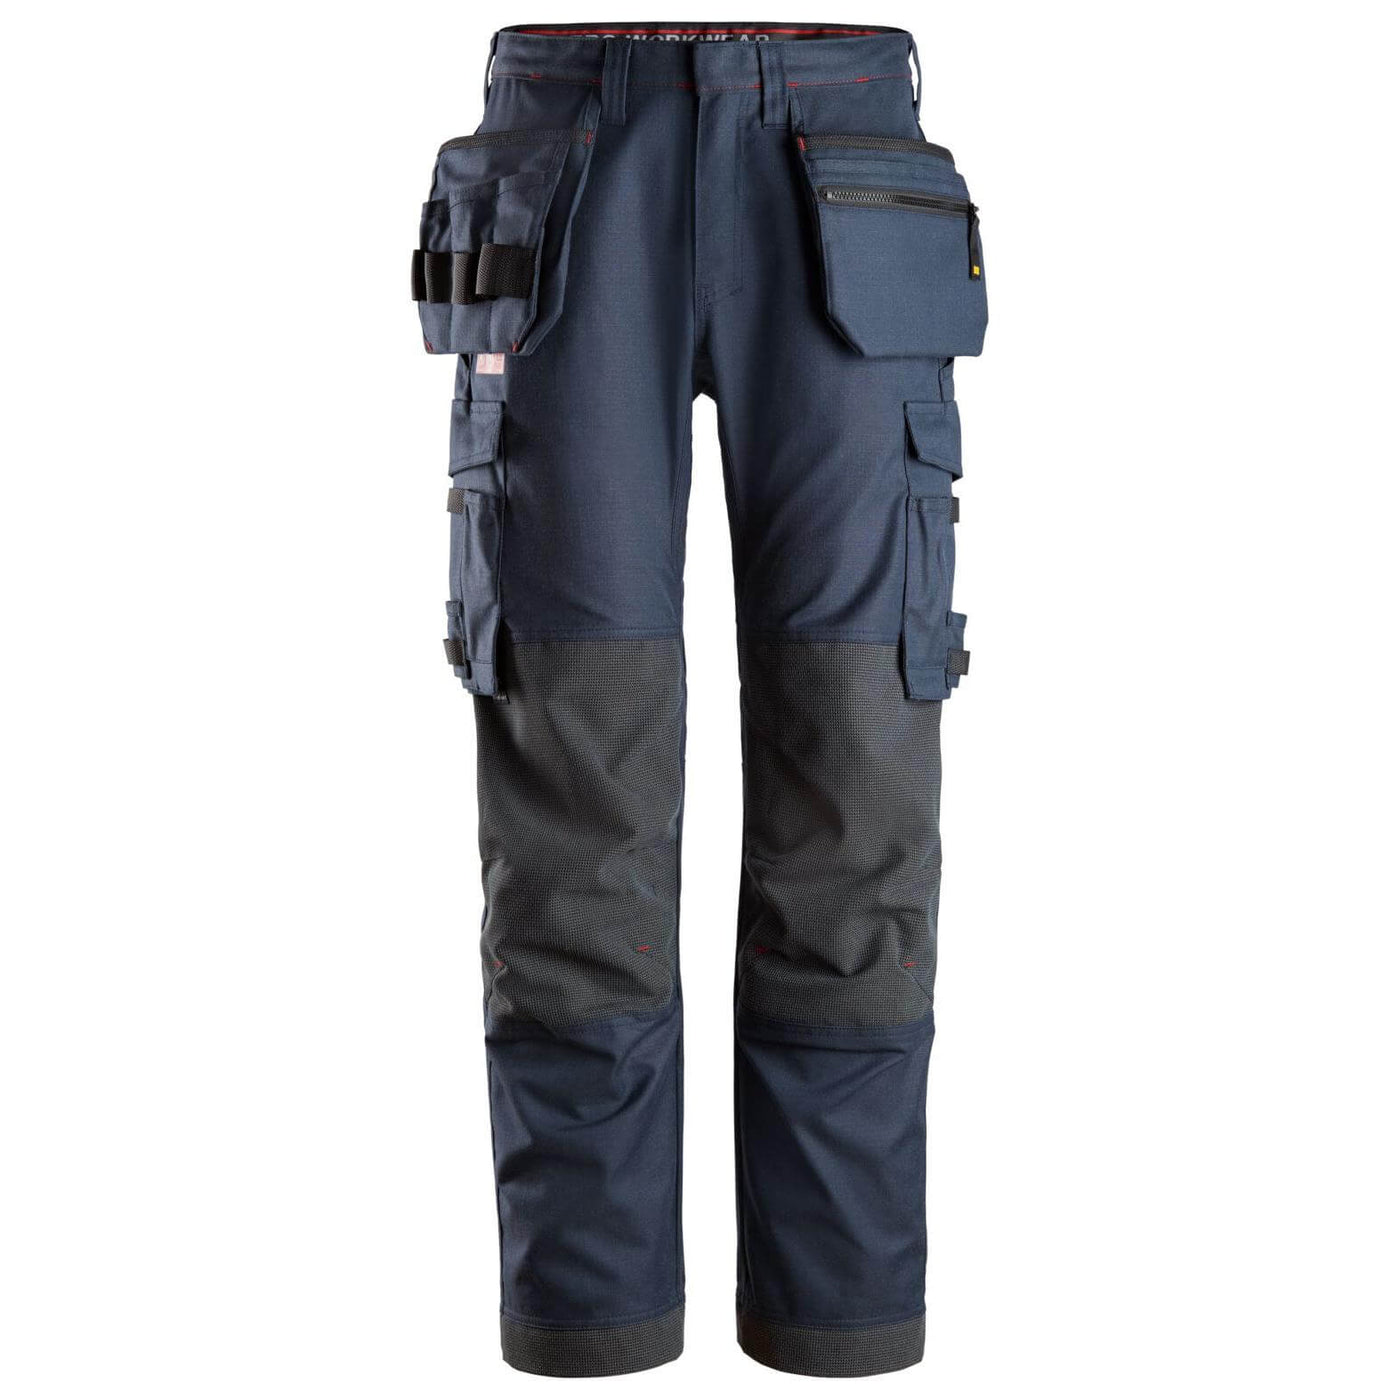 Snickers 6262 ProtecWork Work Trousers with Holster Pockets and Equal Leg Pockets Navy 3823285 #colour_navy